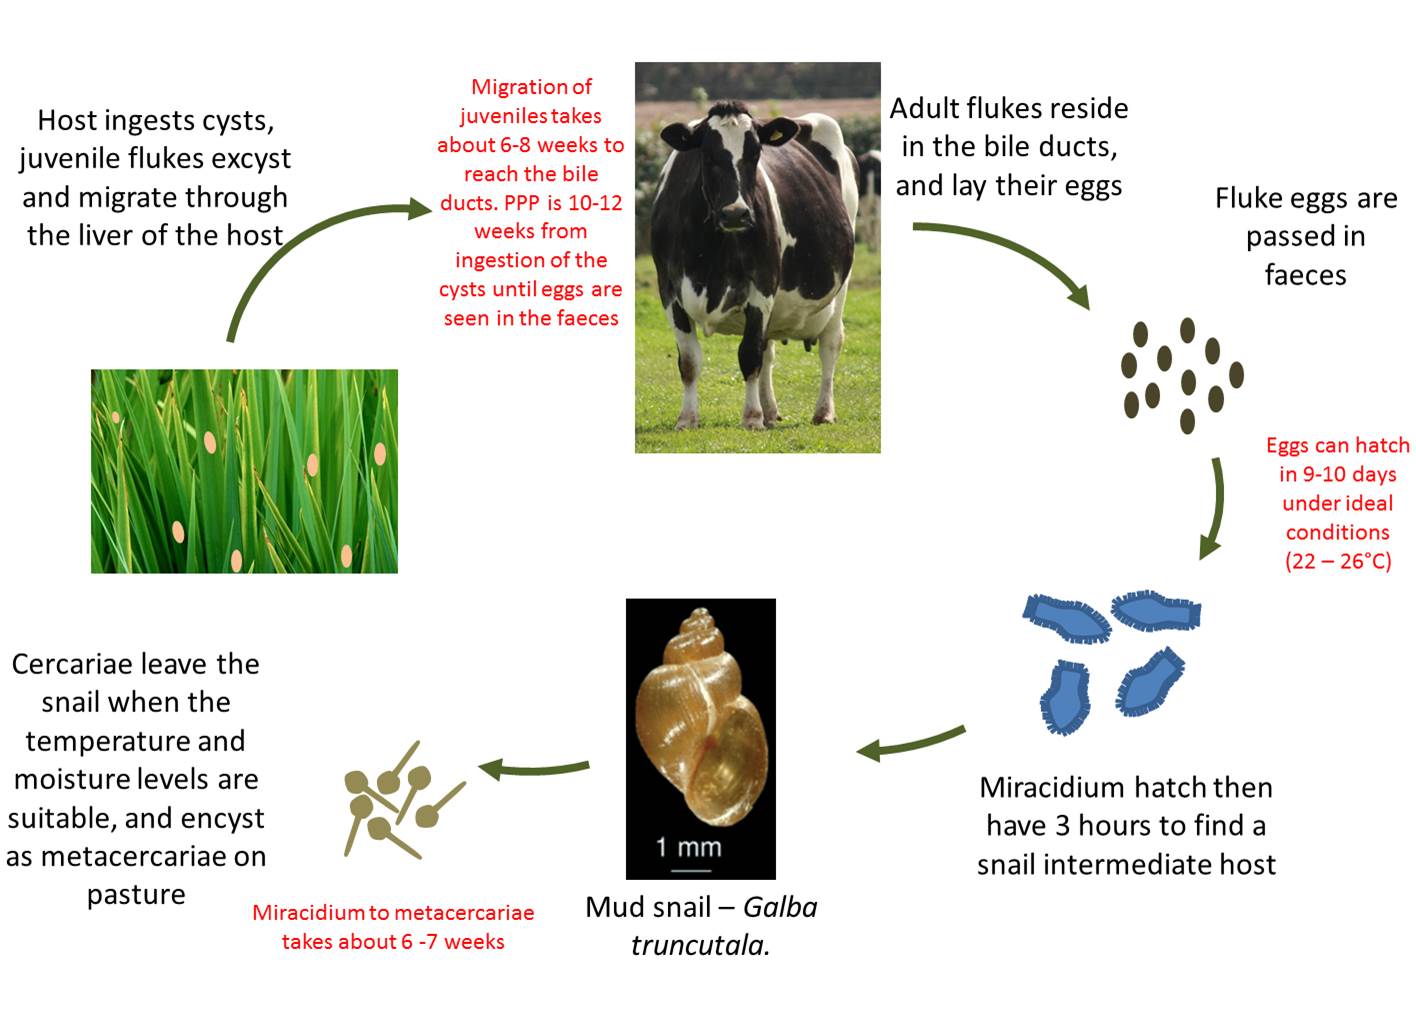 What is the life cycle of a dairy cow